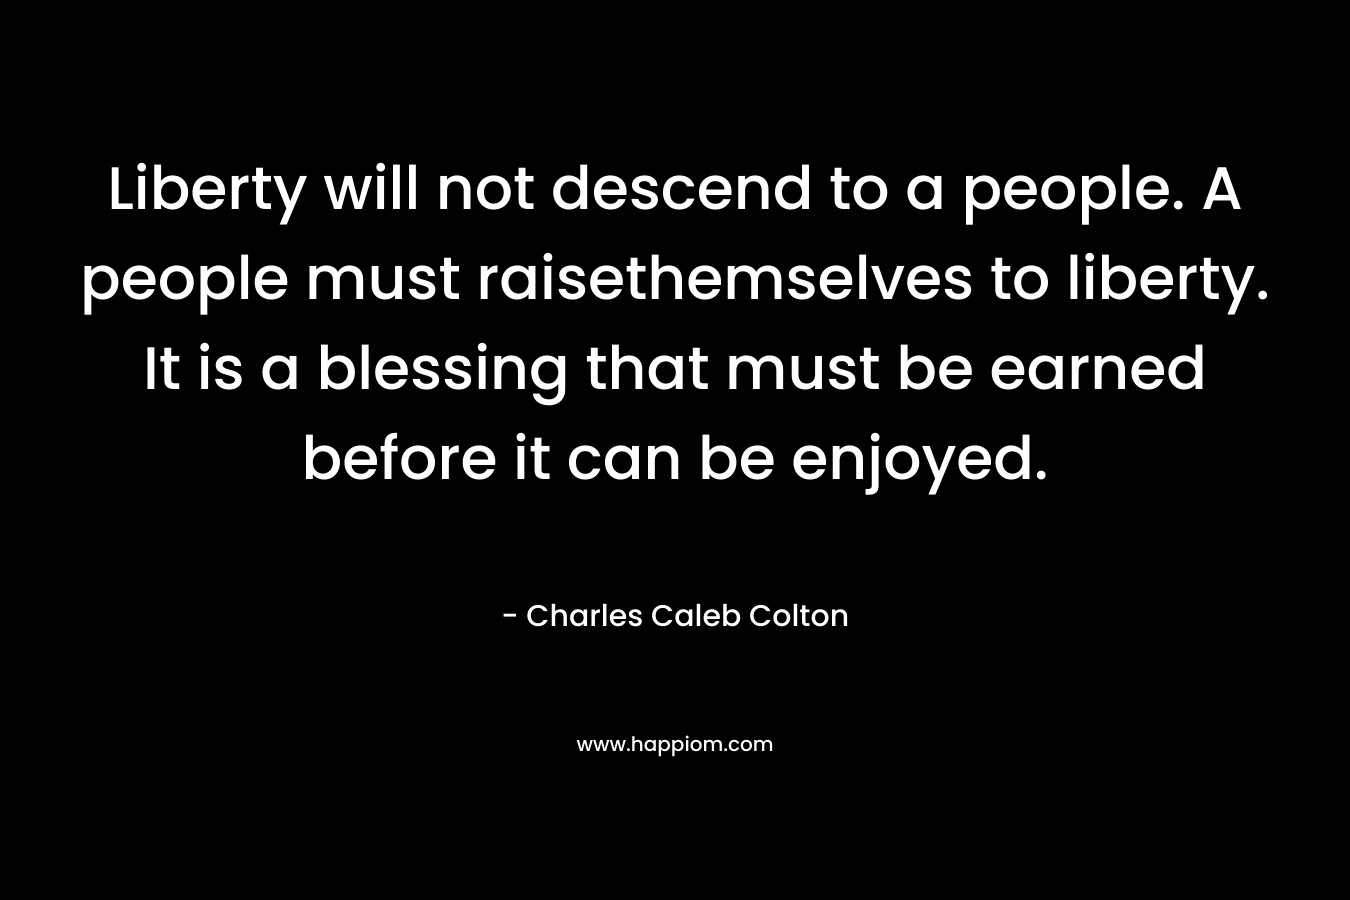 Liberty will not descend to a people. A people must raisethemselves to liberty. It is a blessing that must be earned before it can be enjoyed. – Charles Caleb Colton